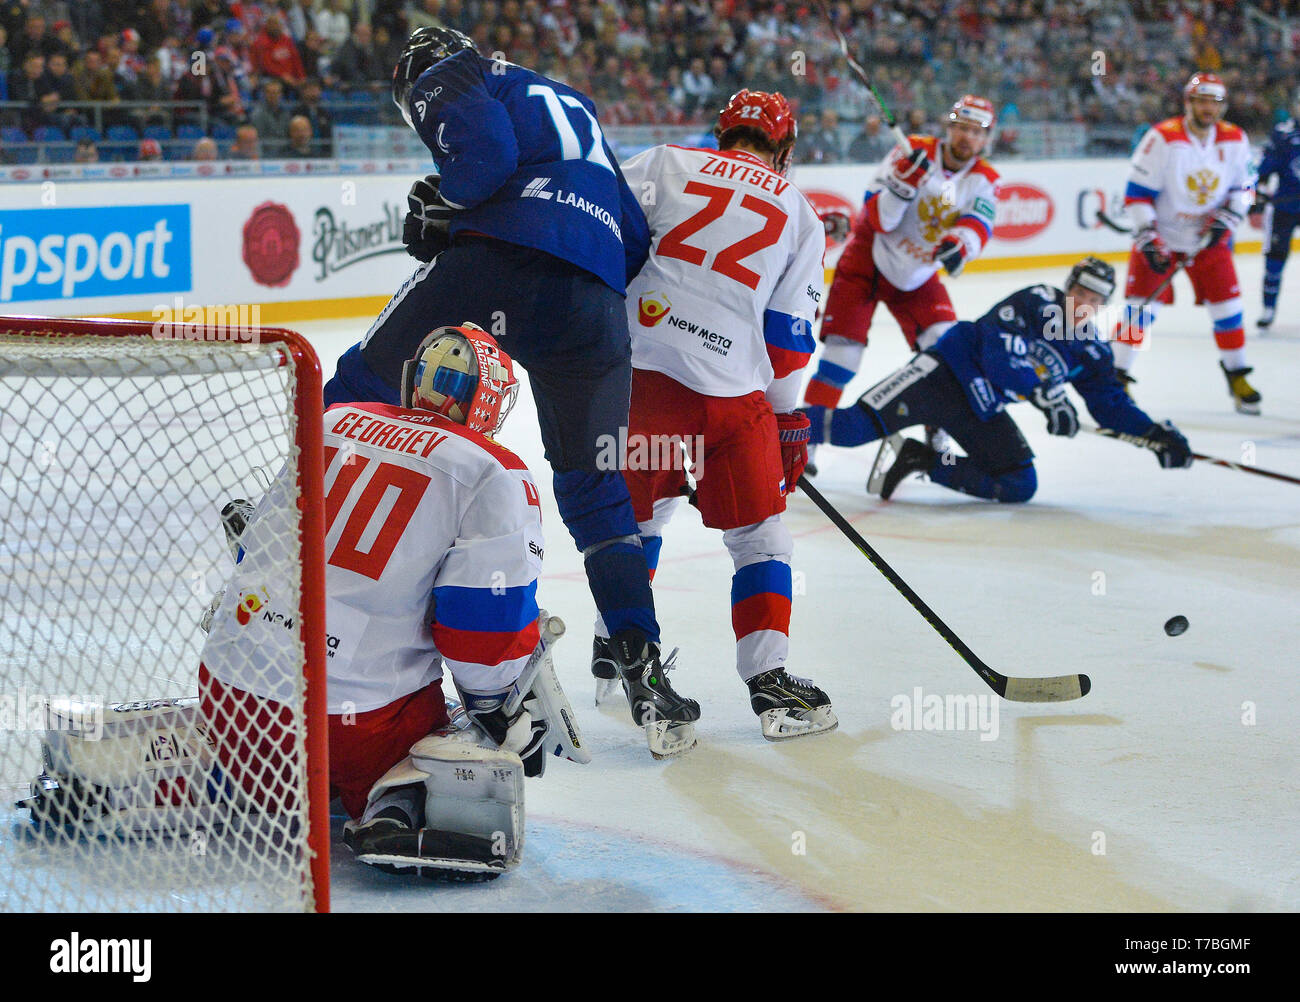 Brno, Czech Republic. 04th May, 2019. The action in front of the goalkeeper Alexandar Georgiyev's goalpost during the Russia vs Finland match within Carlson Hockey Games tournament, part of Euro Hockey Tour in Brno, Czech Republic, May 4, 2019. Credit: Lubos Pavlicek/CTK Photo/Alamy Live News Stock Photo